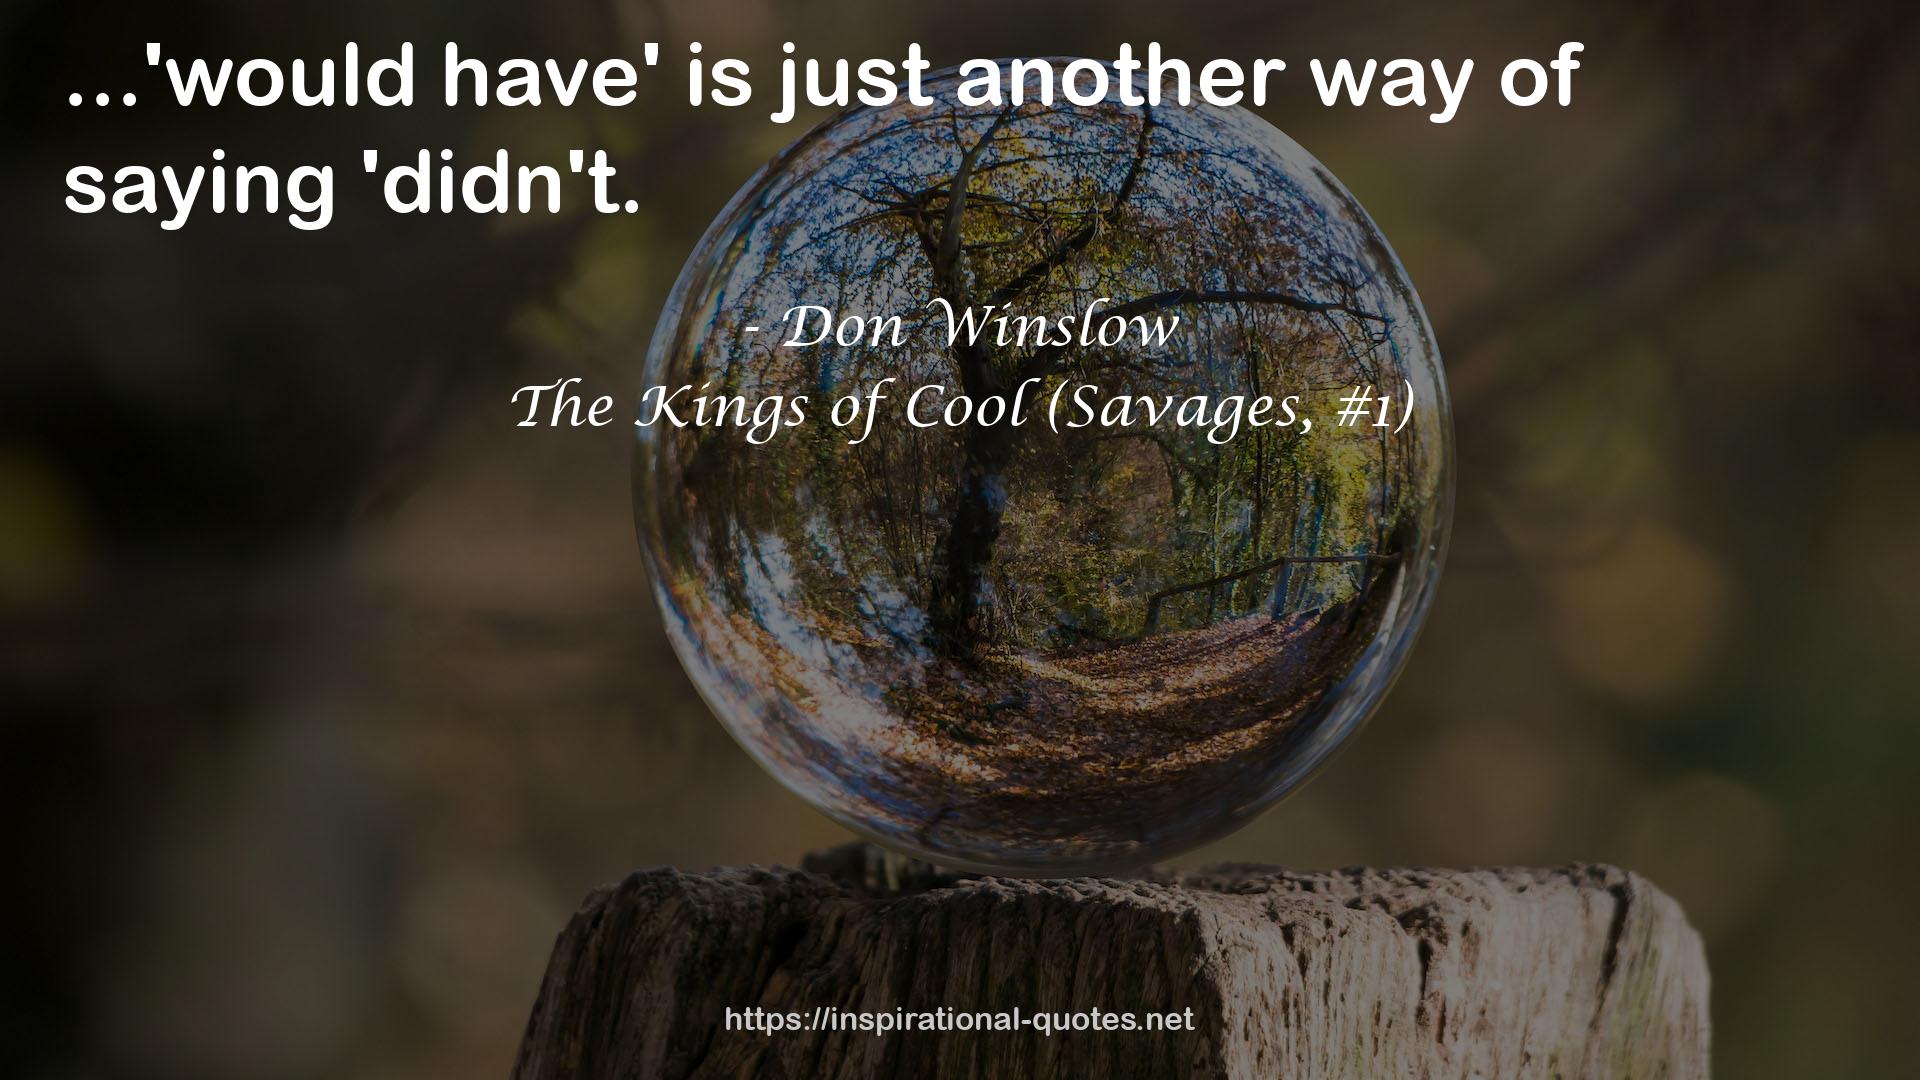 The Kings of Cool (Savages, #1) QUOTES